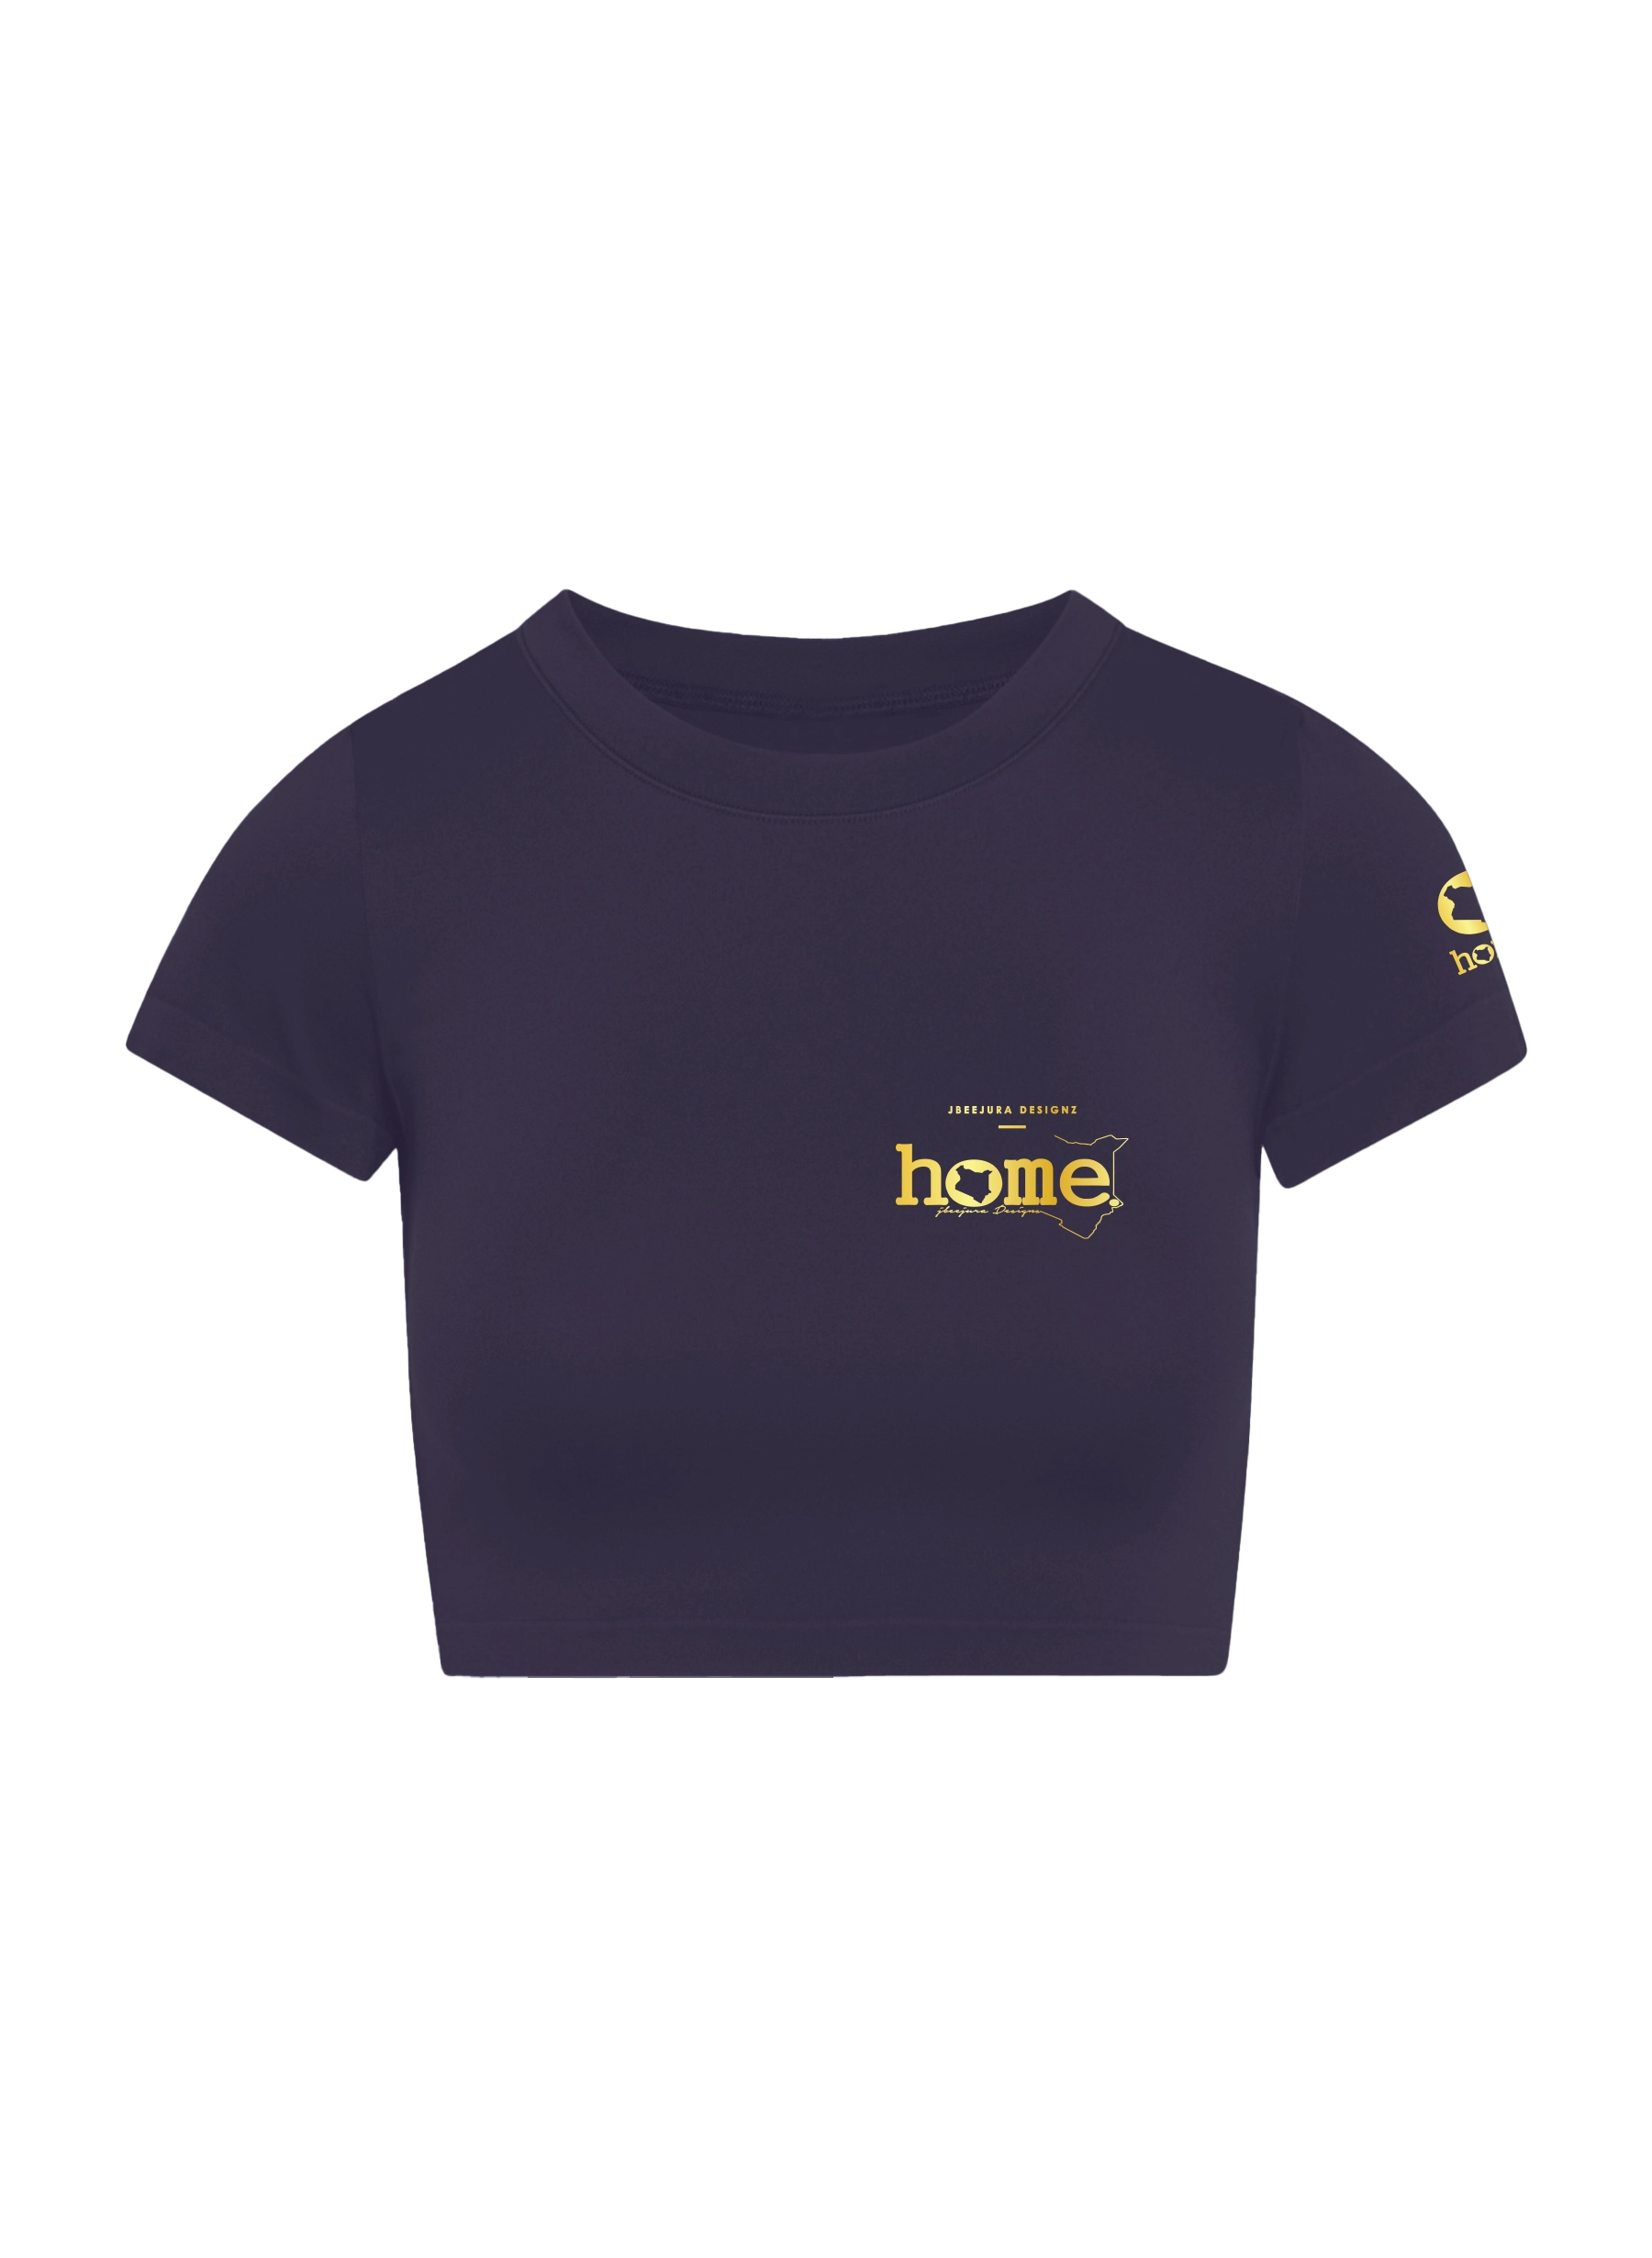 home_254 SHORT SLEEVED  RICH PURPLE ARIA TEE WITH A GOLD 3D WORDS PRINT 